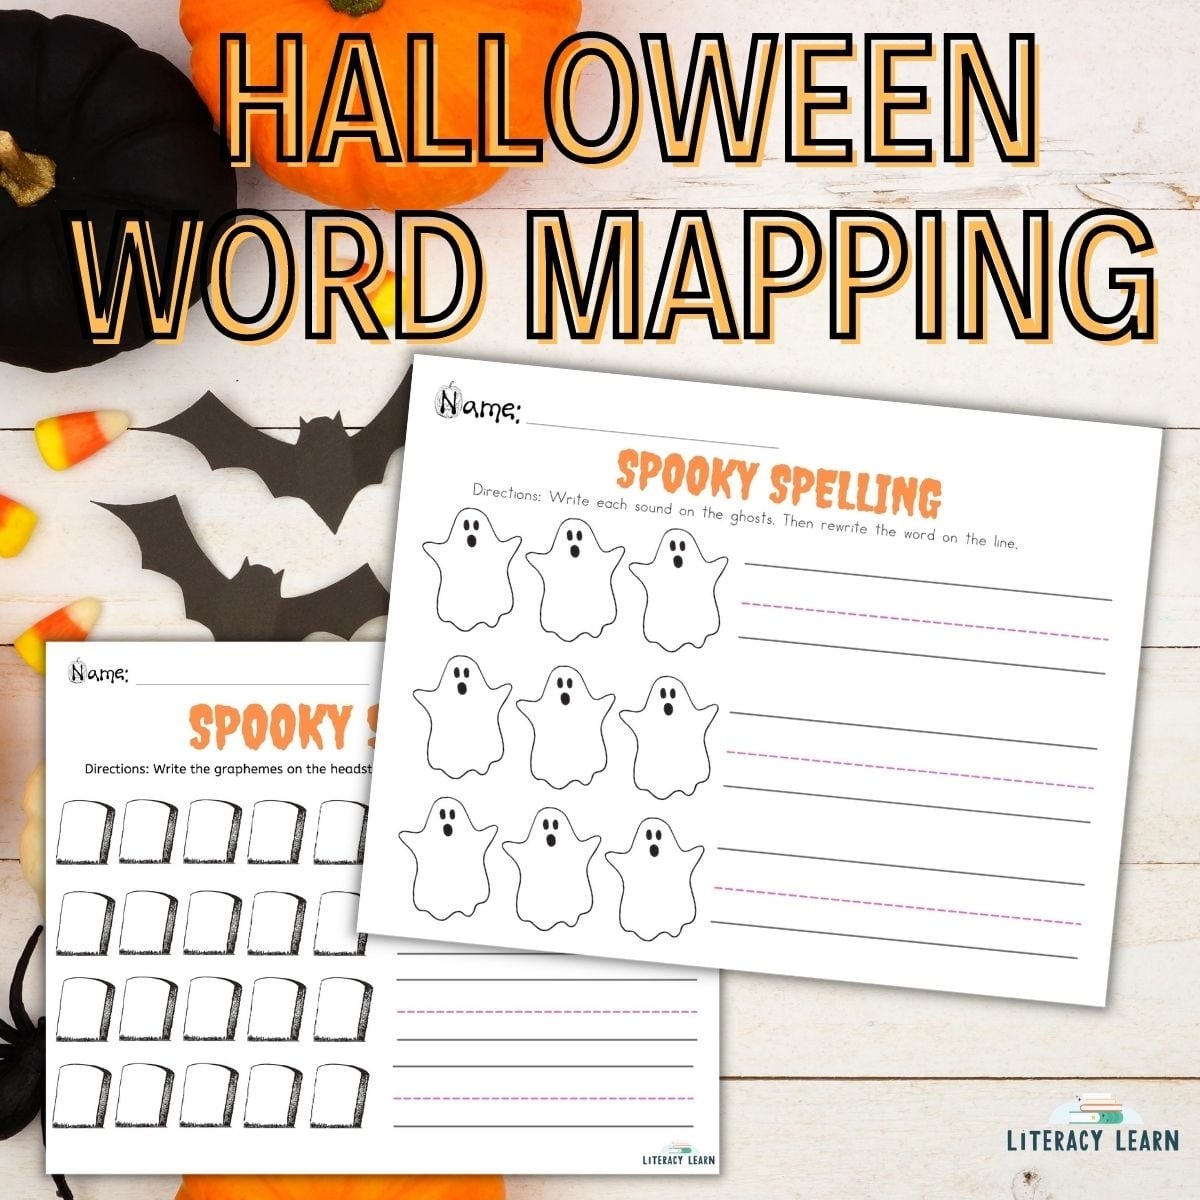 Graphic with words 'Halloween Word Mapping" showing two Halloween worksheets on a Halloween background.